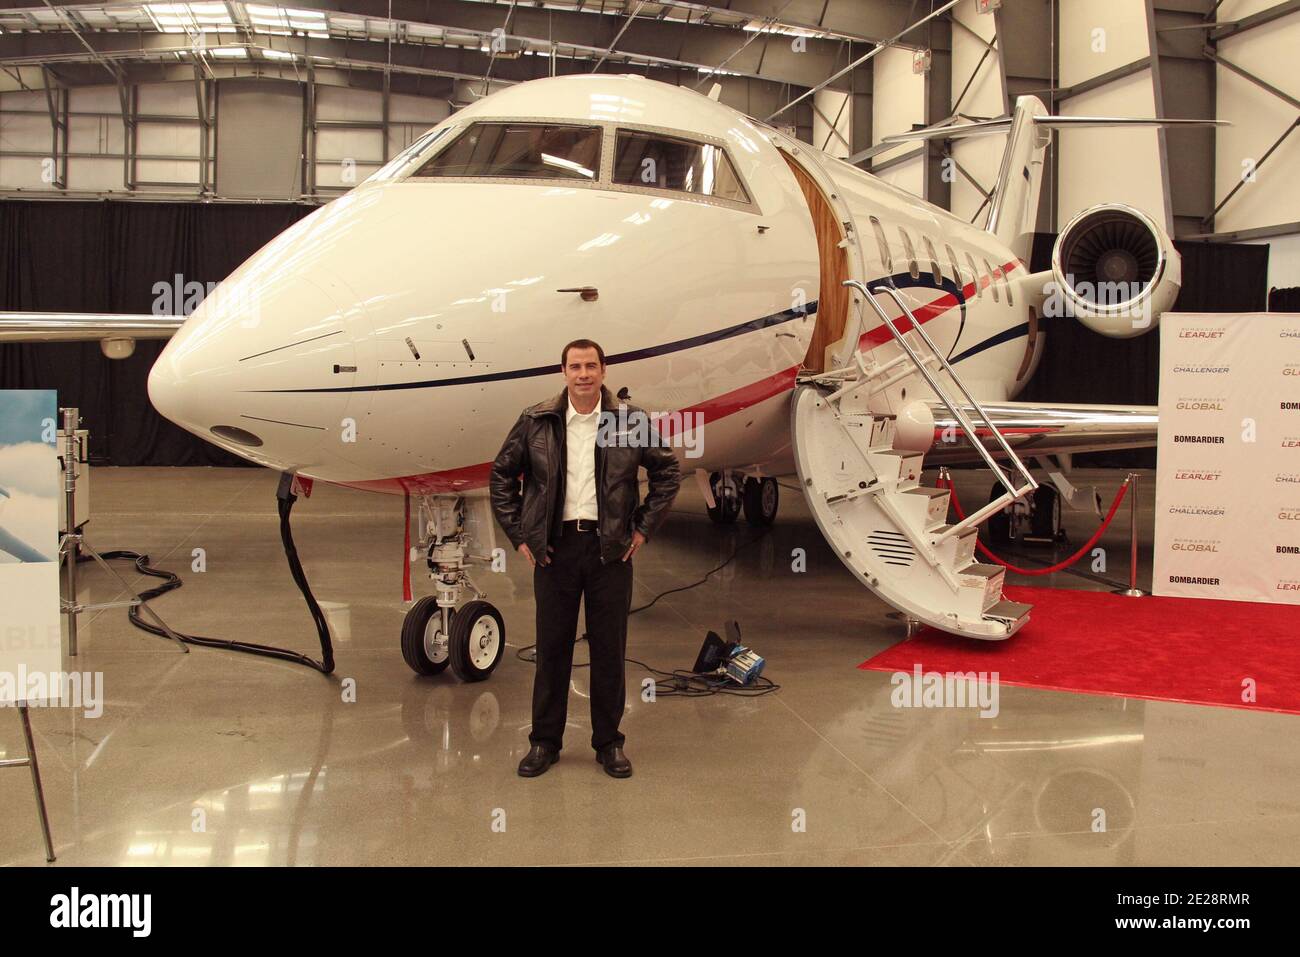 John Travolta, Bombardier Aircraft introduce their latest Aircraft, The Lear Jet, The Challenger, and The Global 5000 Jets in Hangar 25 at the Burbank Airport, in Los Angeles California, USA, September 20, 2011. Photo by Baxter/ABACAPRESS.COM Stock Photo